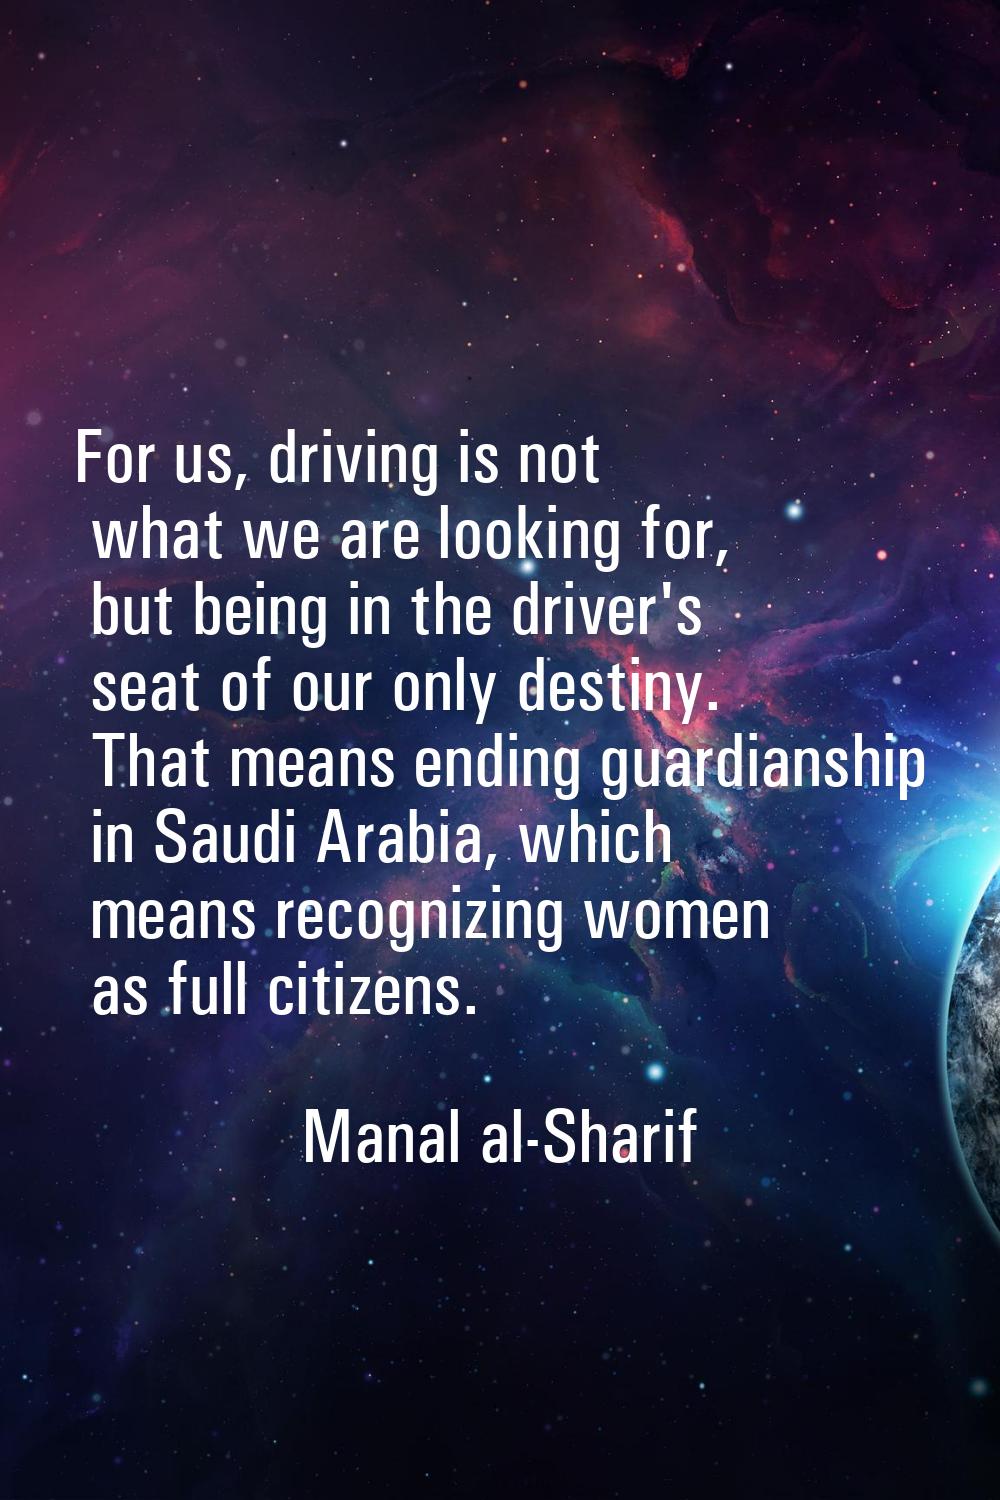 For us, driving is not what we are looking for, but being in the driver's seat of our only destiny.